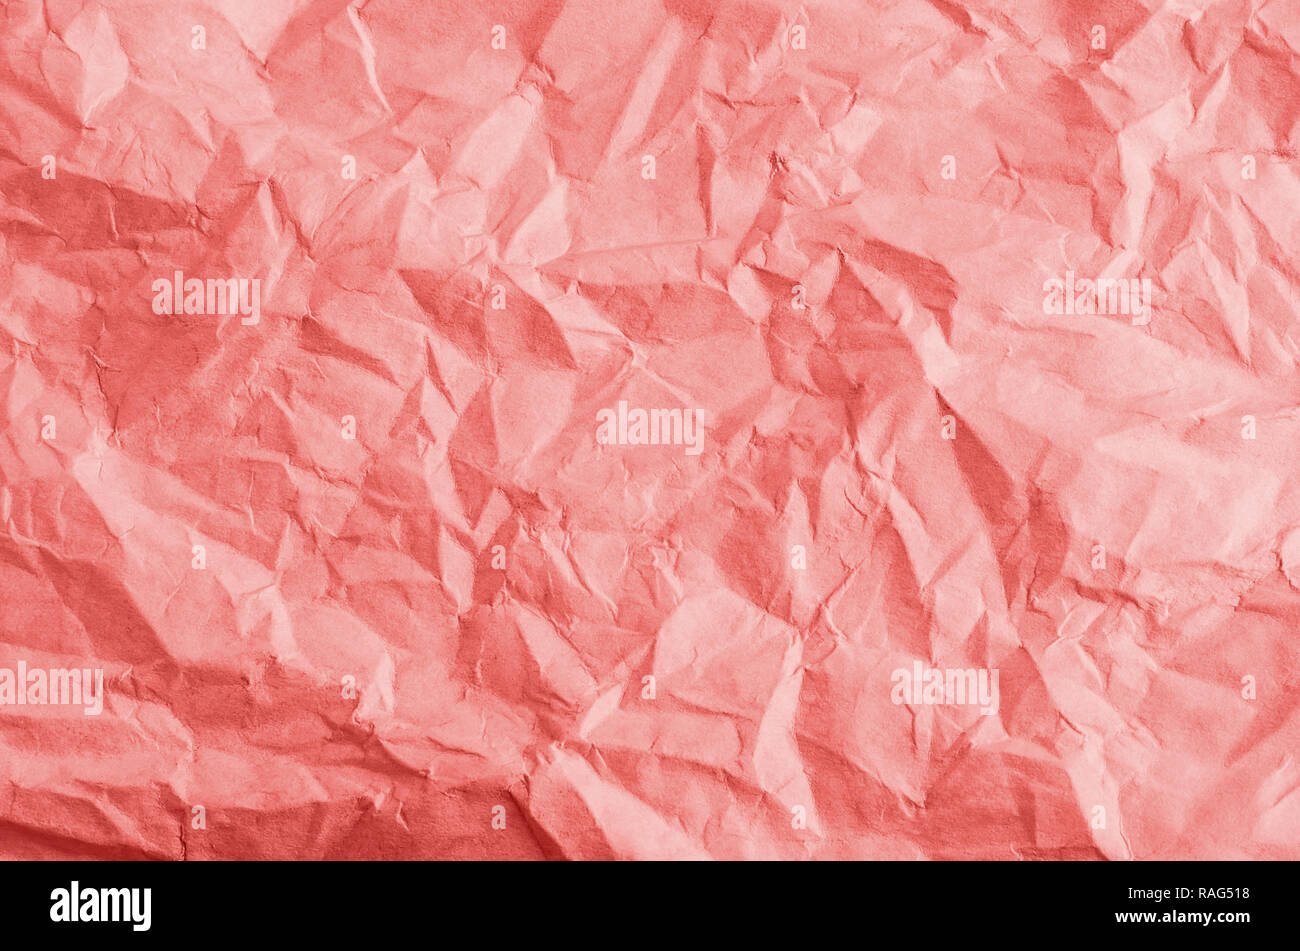 Crumpled, creased and unfolded paper background texture in a coral hue. Stock Photo